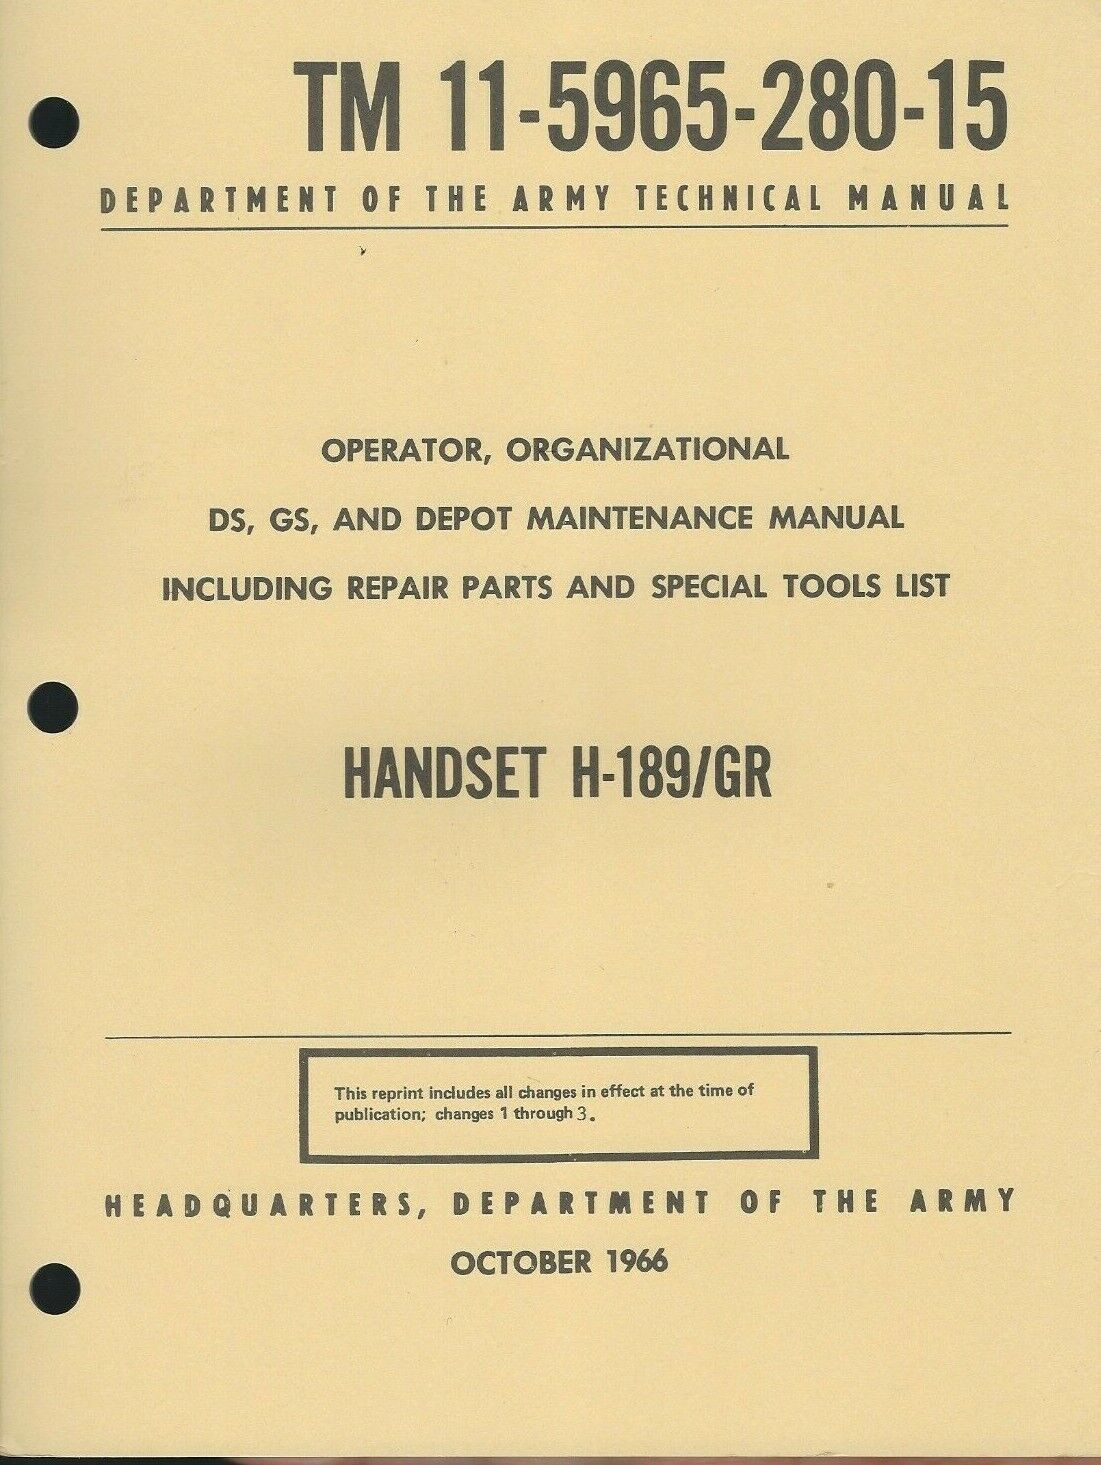 Historical book for Handset H-189/GR, Operator and Maintenance